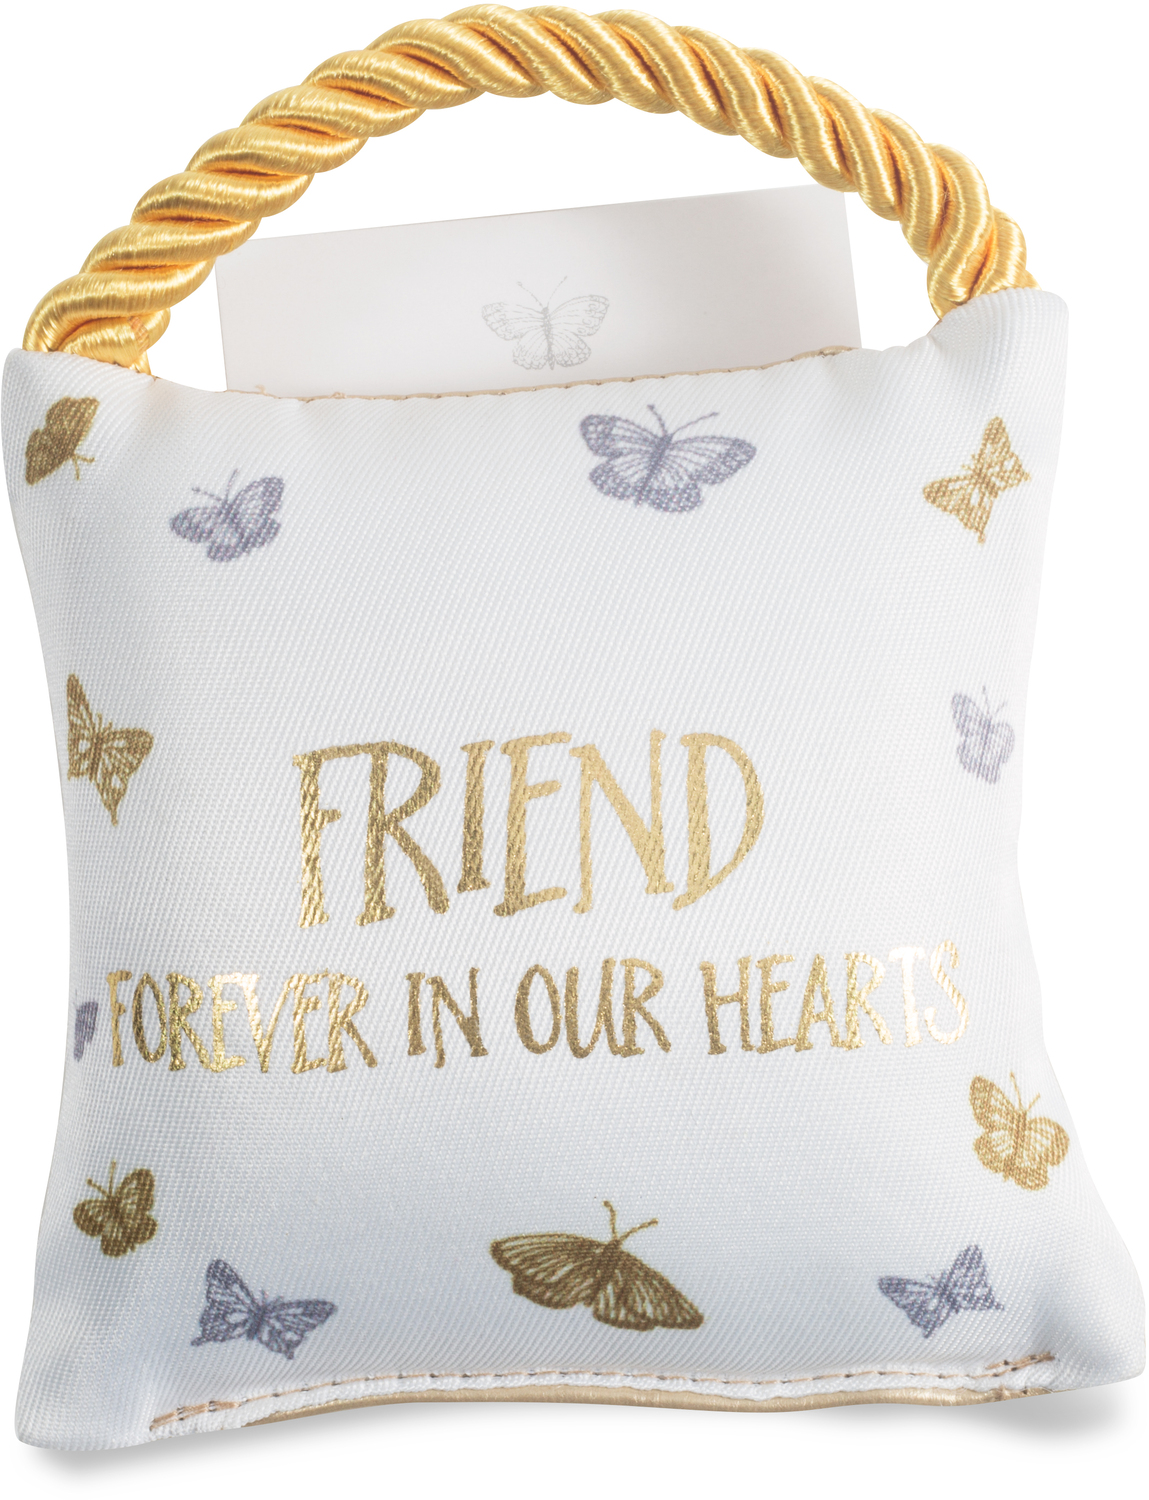 Friend by Butterfly Whispers - Friend - 4.5" Memorial Pocket Pillow